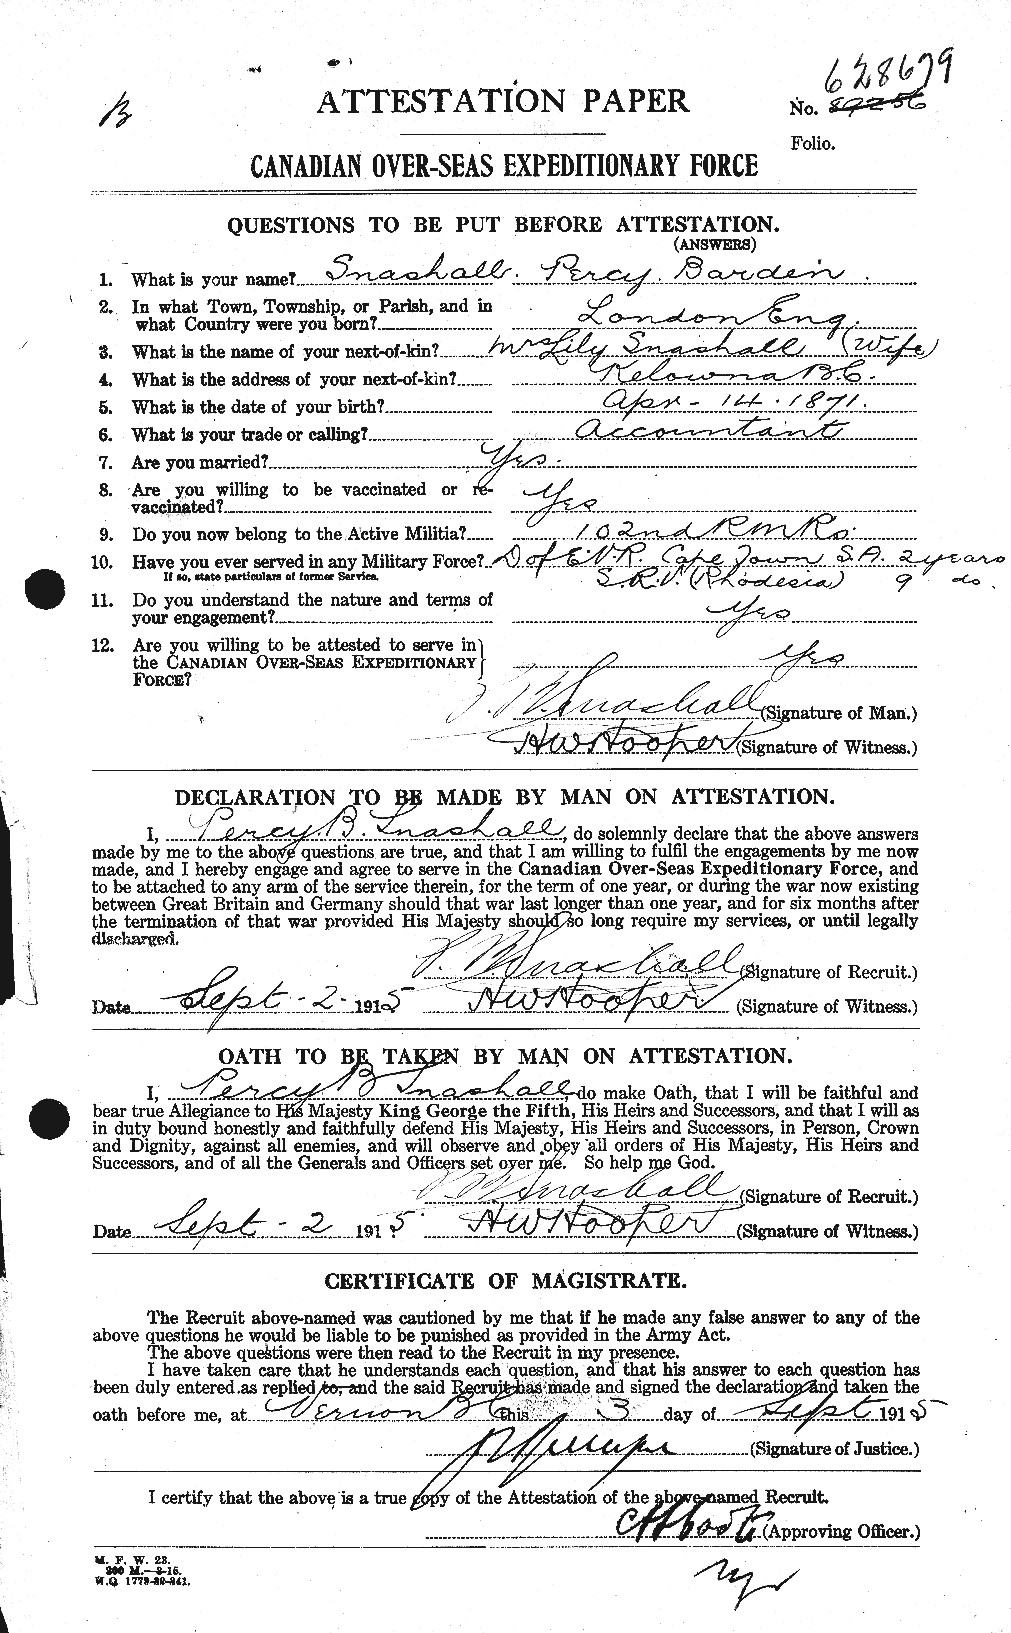 Personnel Records of the First World War - CEF 111183a